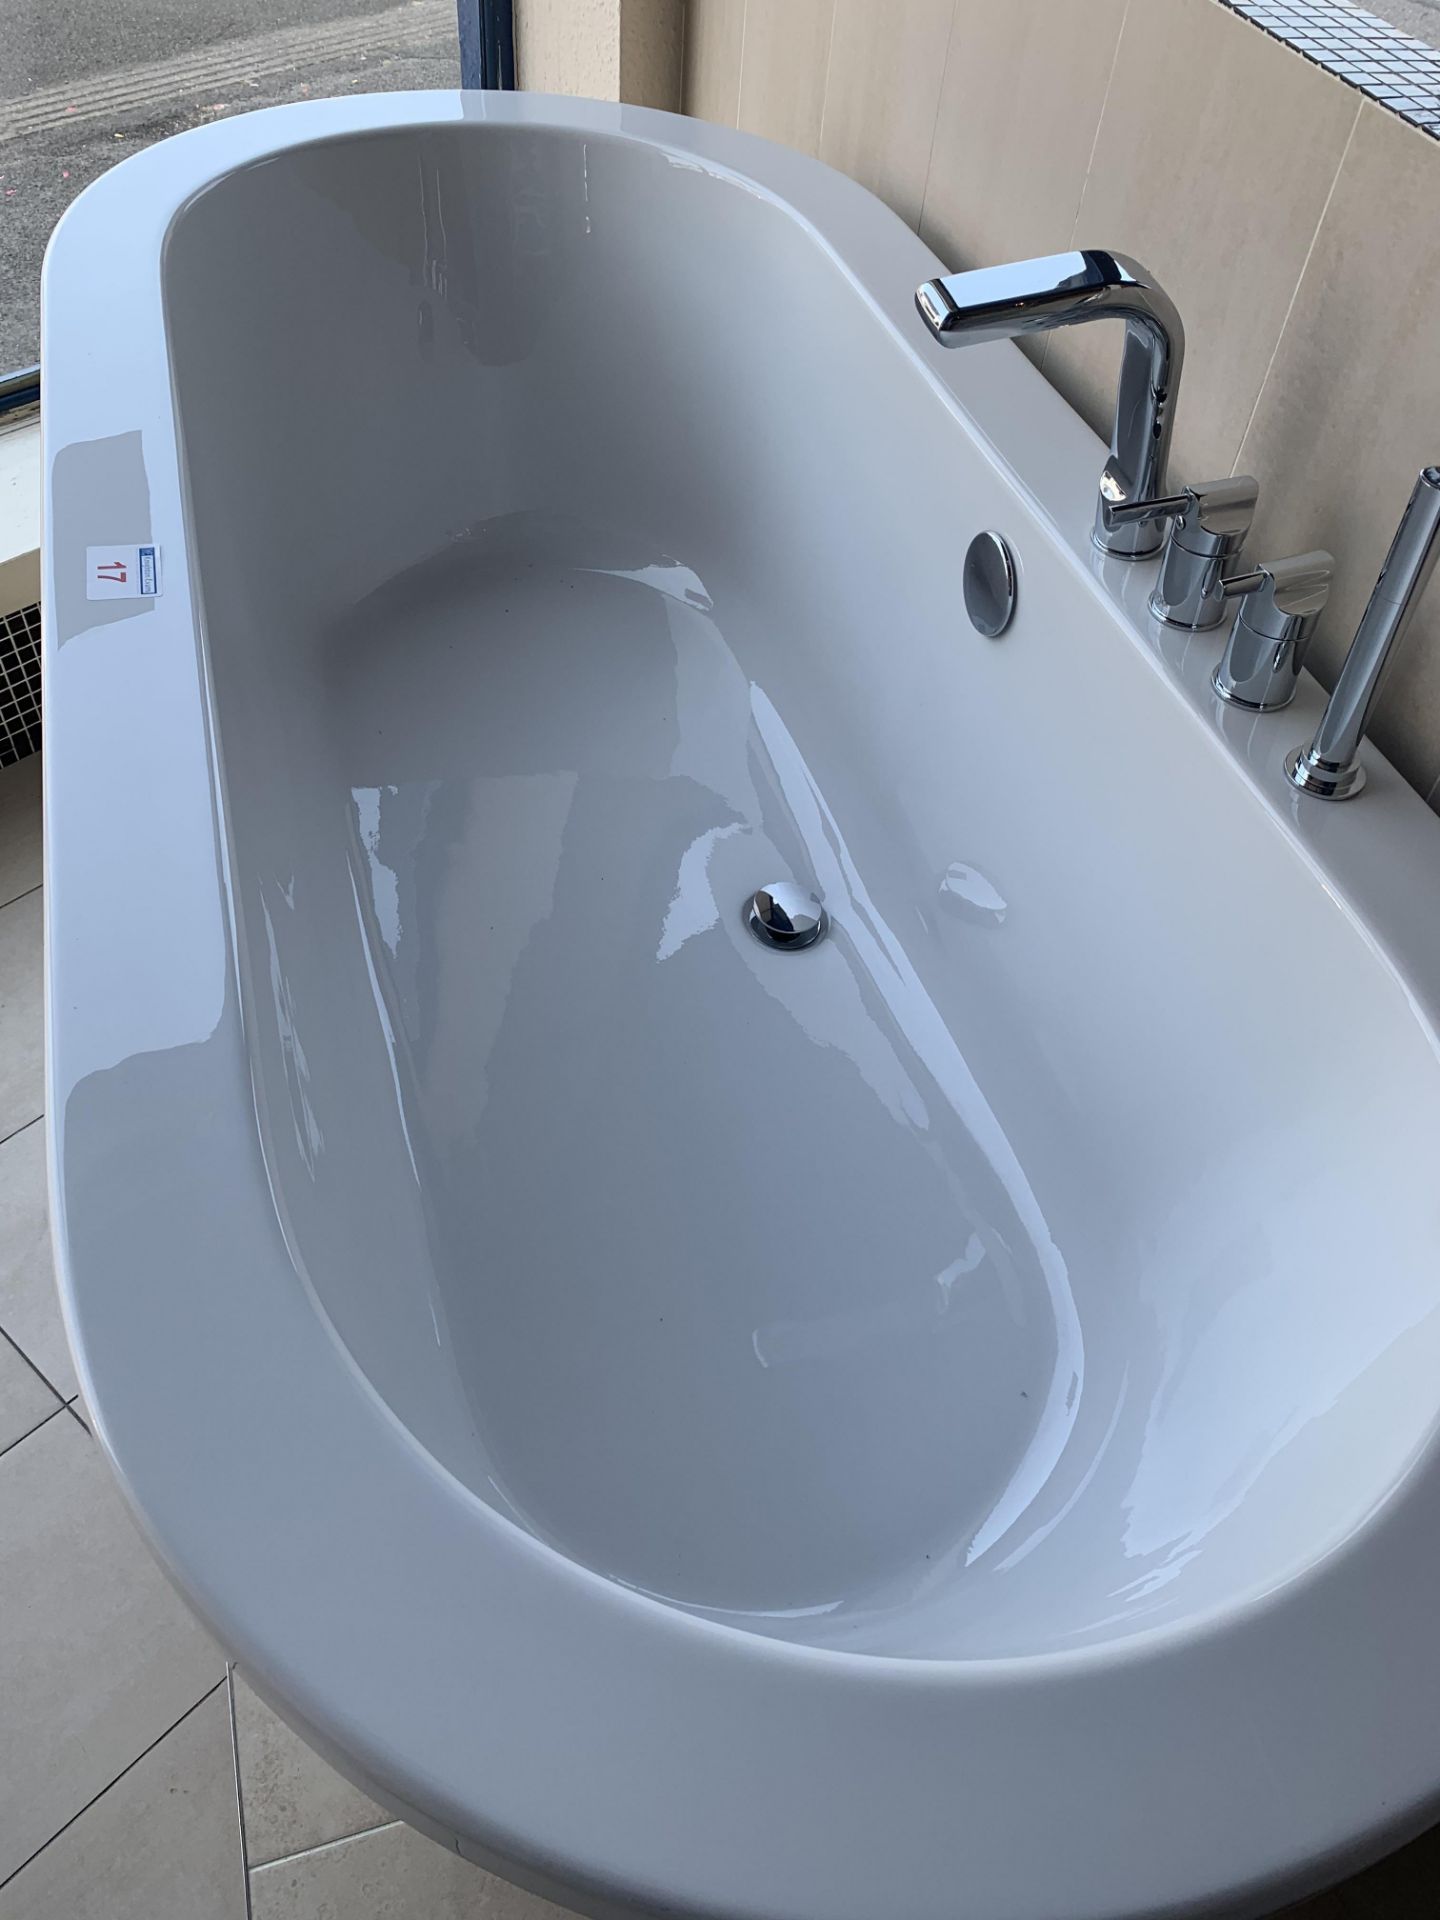 Double ended free style bath 178w x 81d x 60h - Image 3 of 3